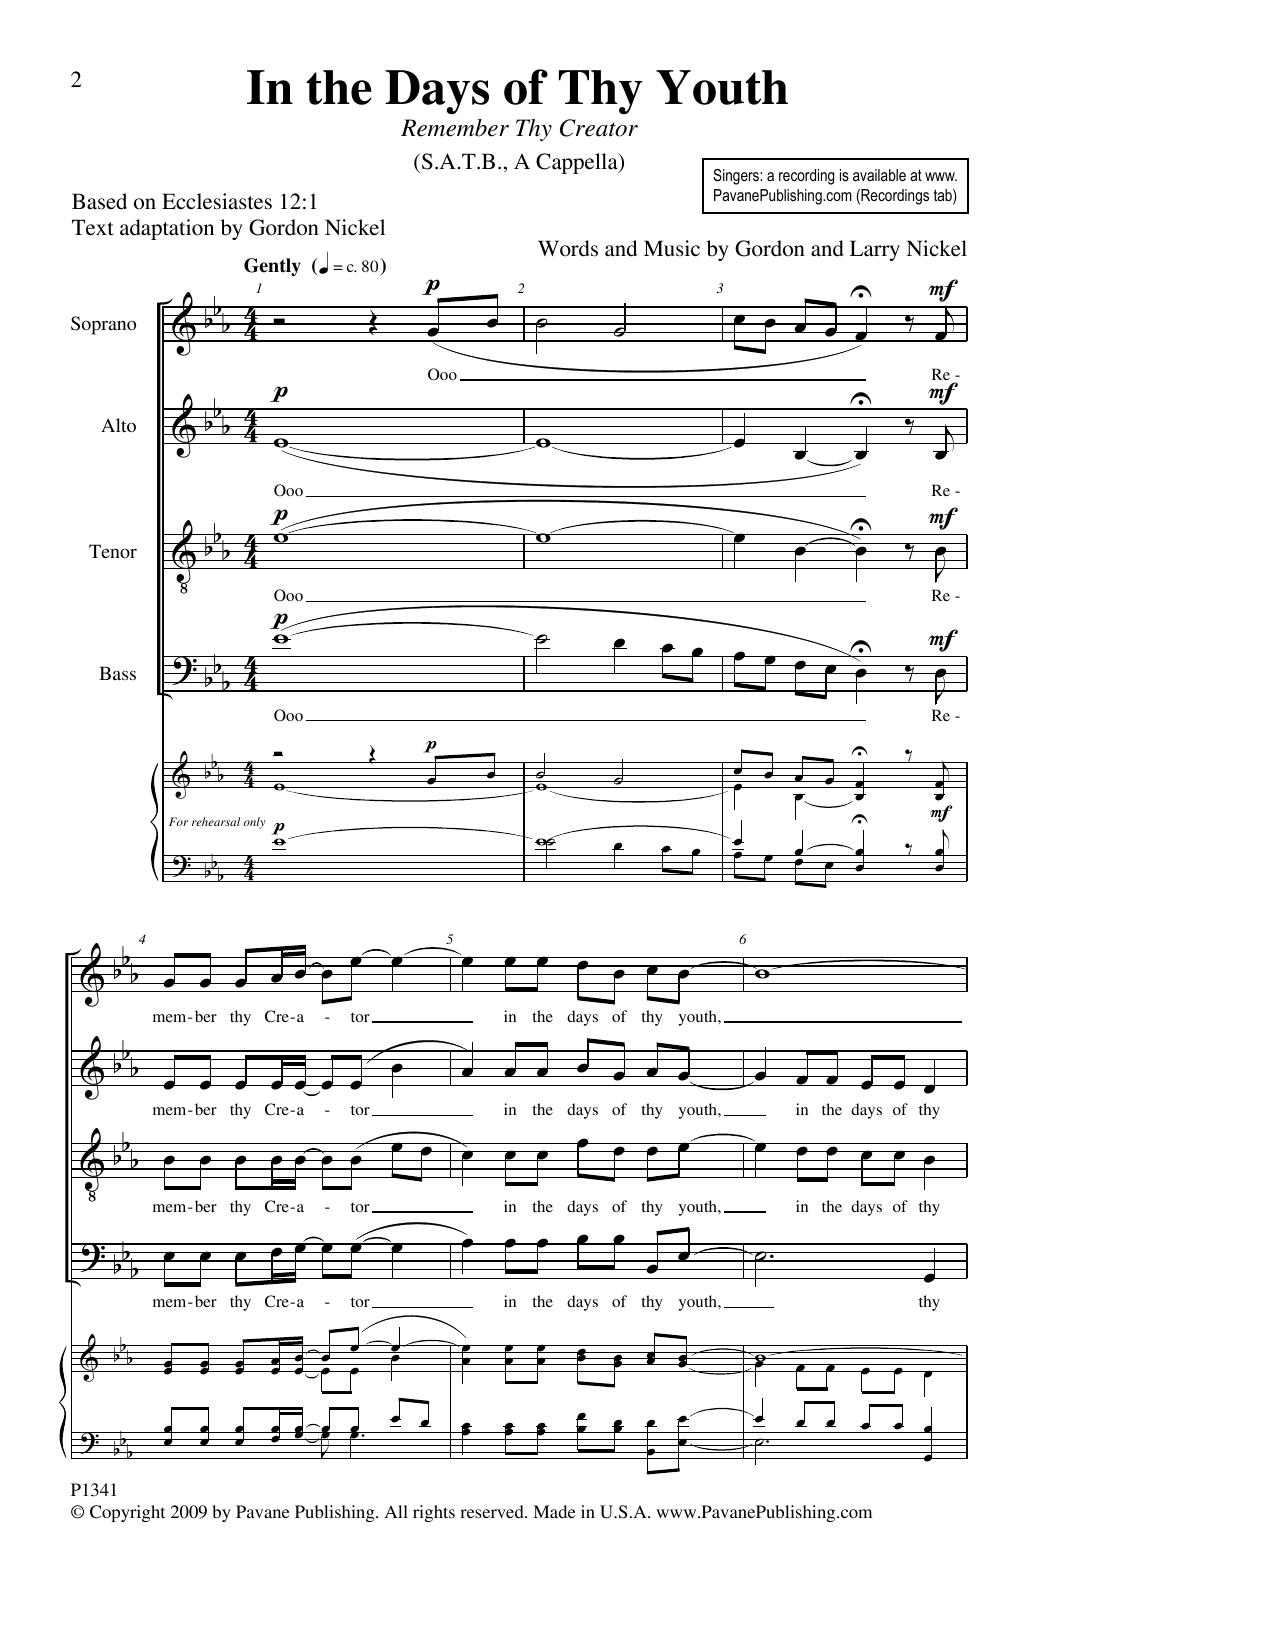 In The Days Of Thy Youth (Remember Thy Creator) (SATB Choir) von Gordon Nickel and Larry Nickel